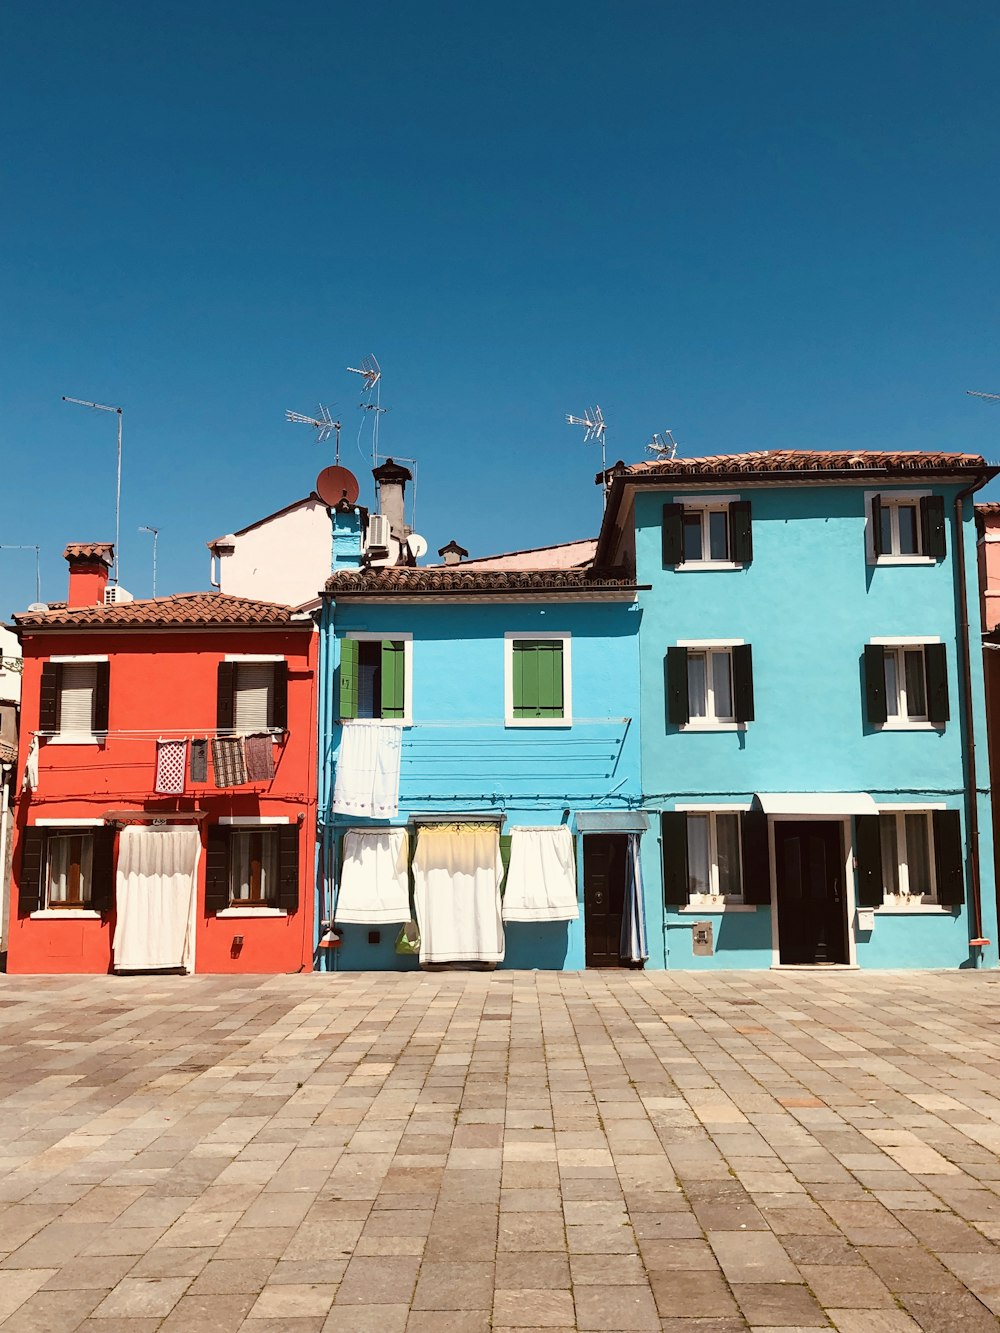 blue white and red concrete houses under blue sky during daytime